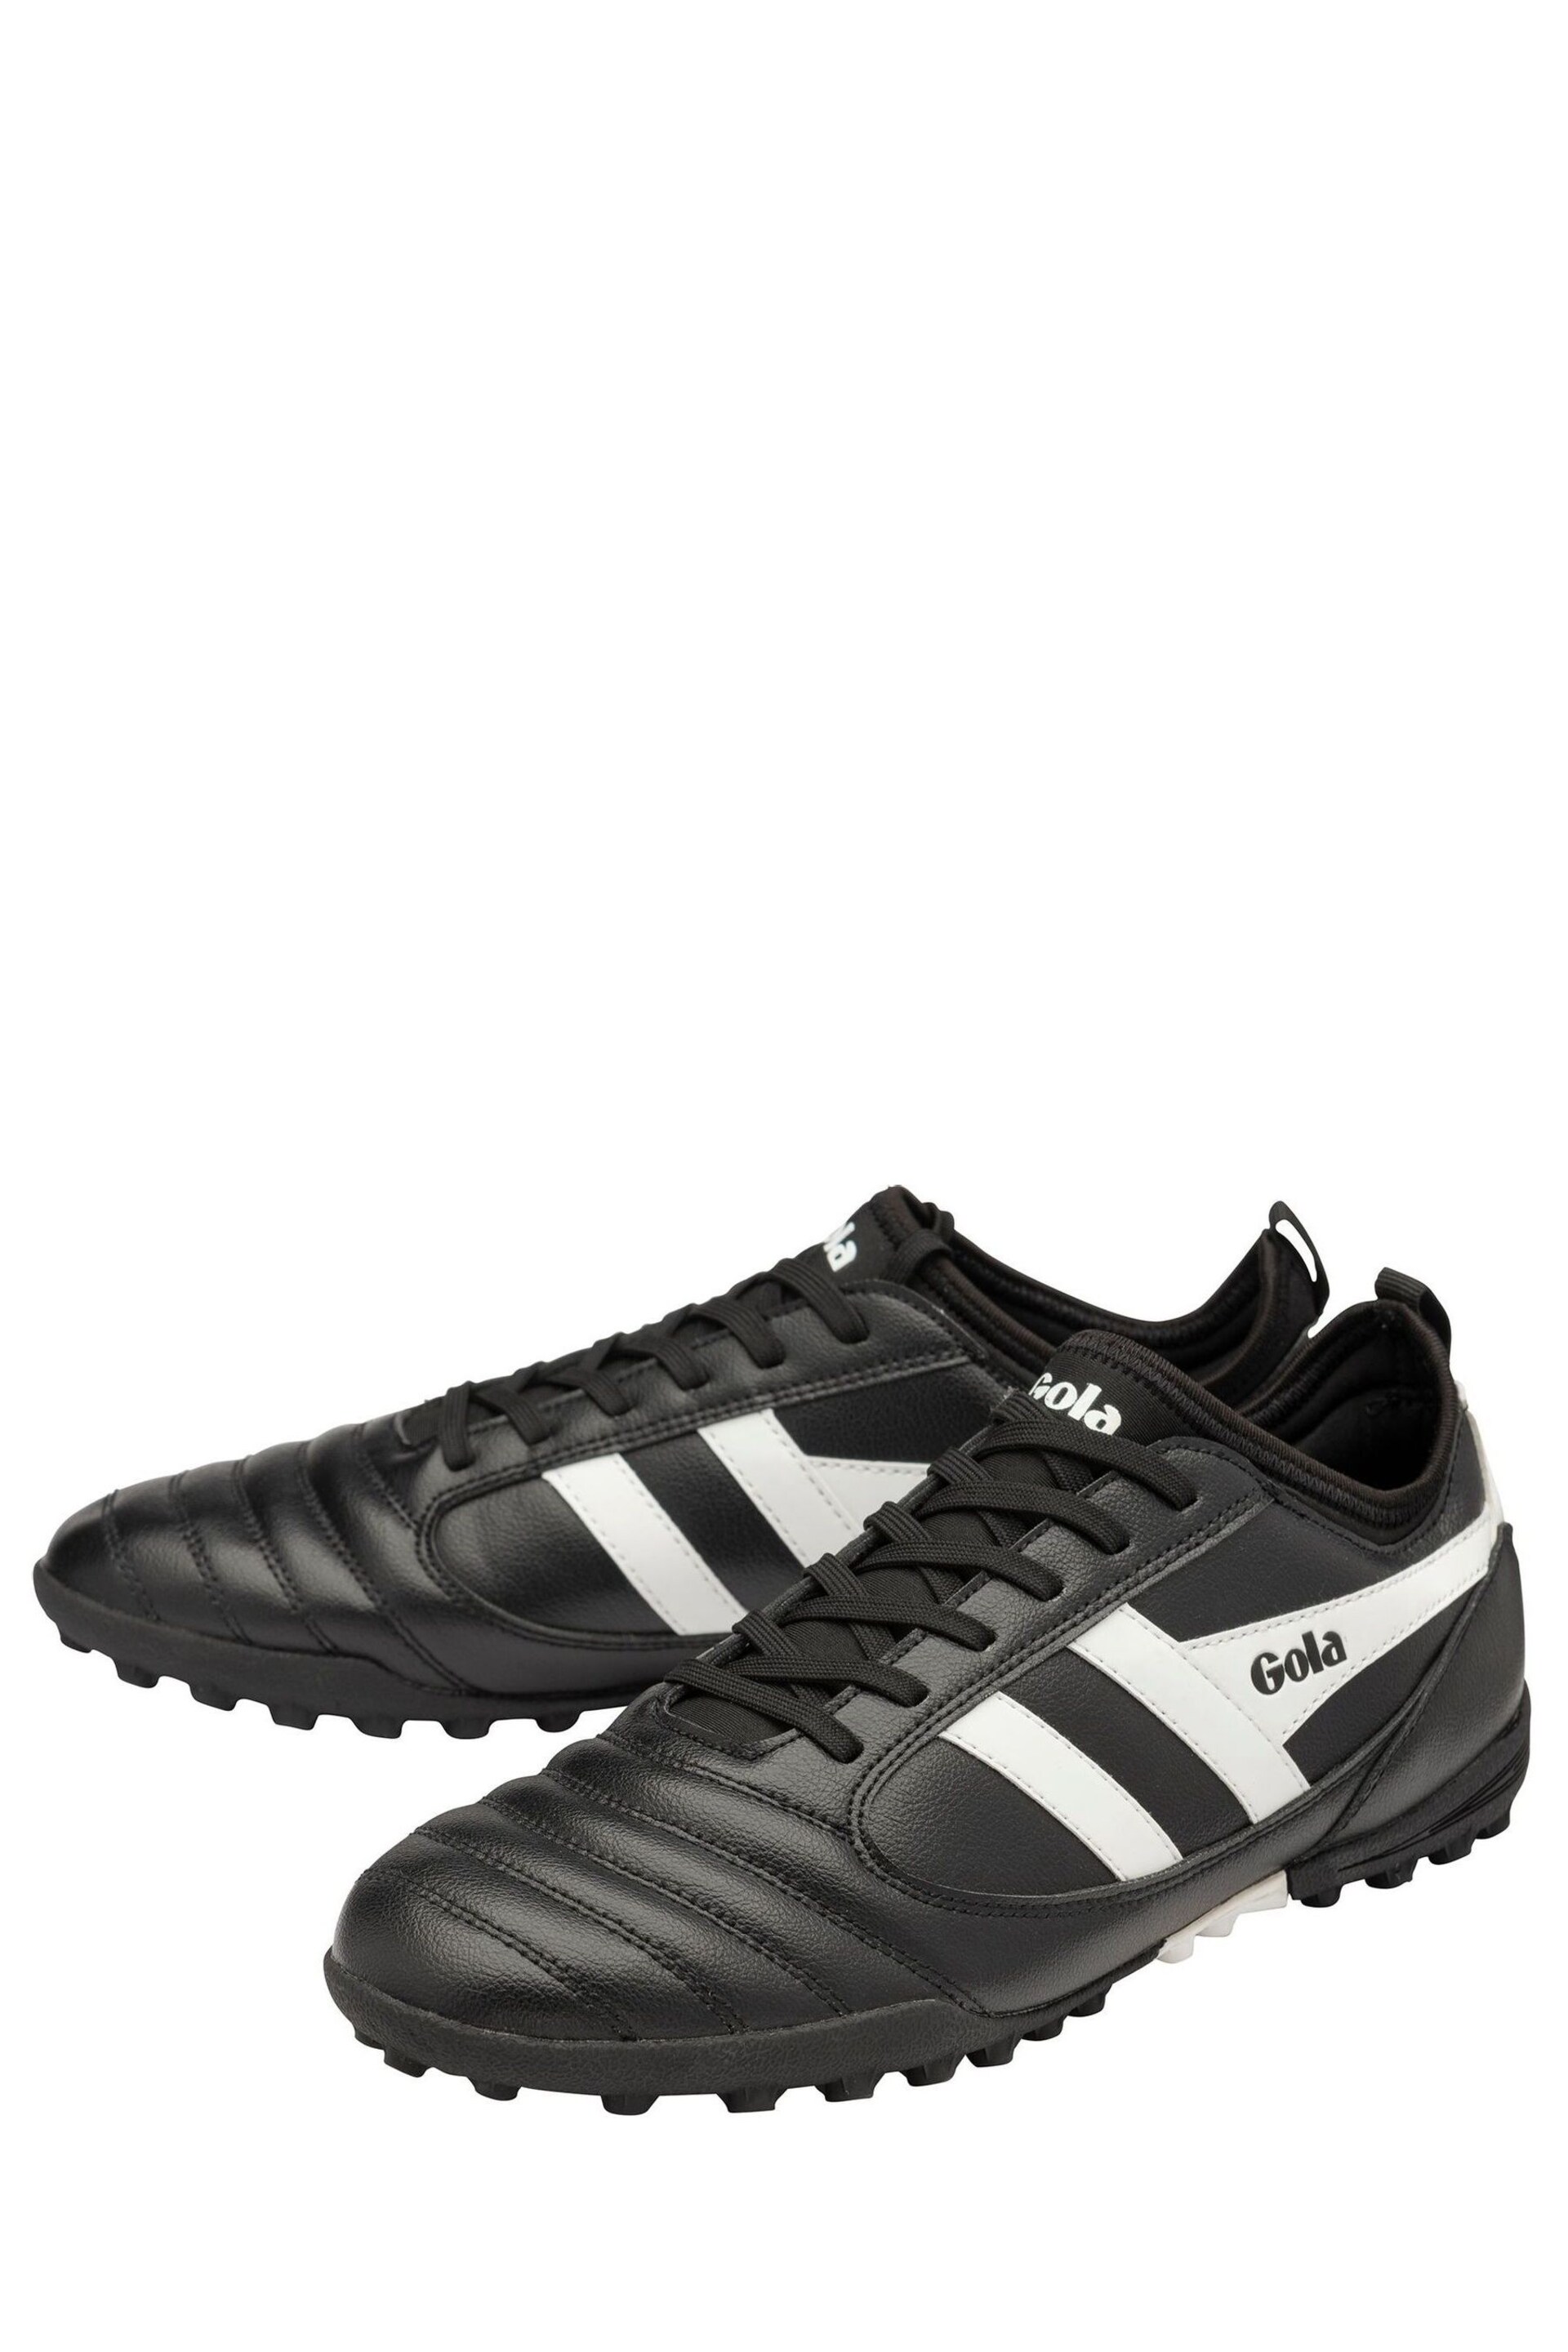 Gola Black/White Mens Ceptor Turf Microfibre Lace-Up Football Boots - Image 3 of 5